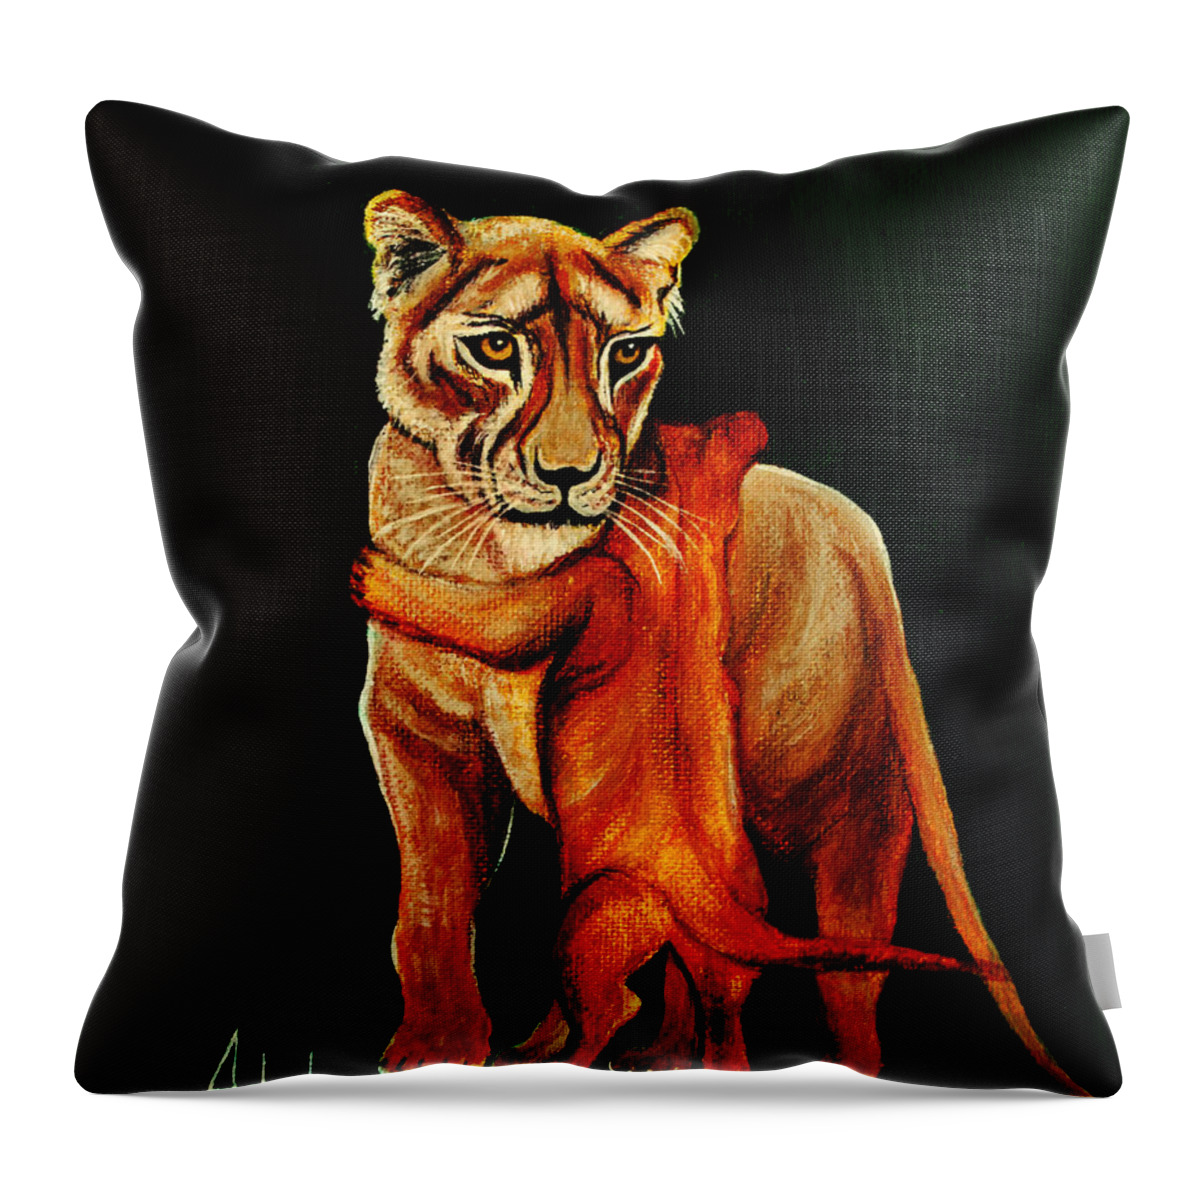 Lion Throw Pillow featuring the painting Hugs by Adele Moscaritolo